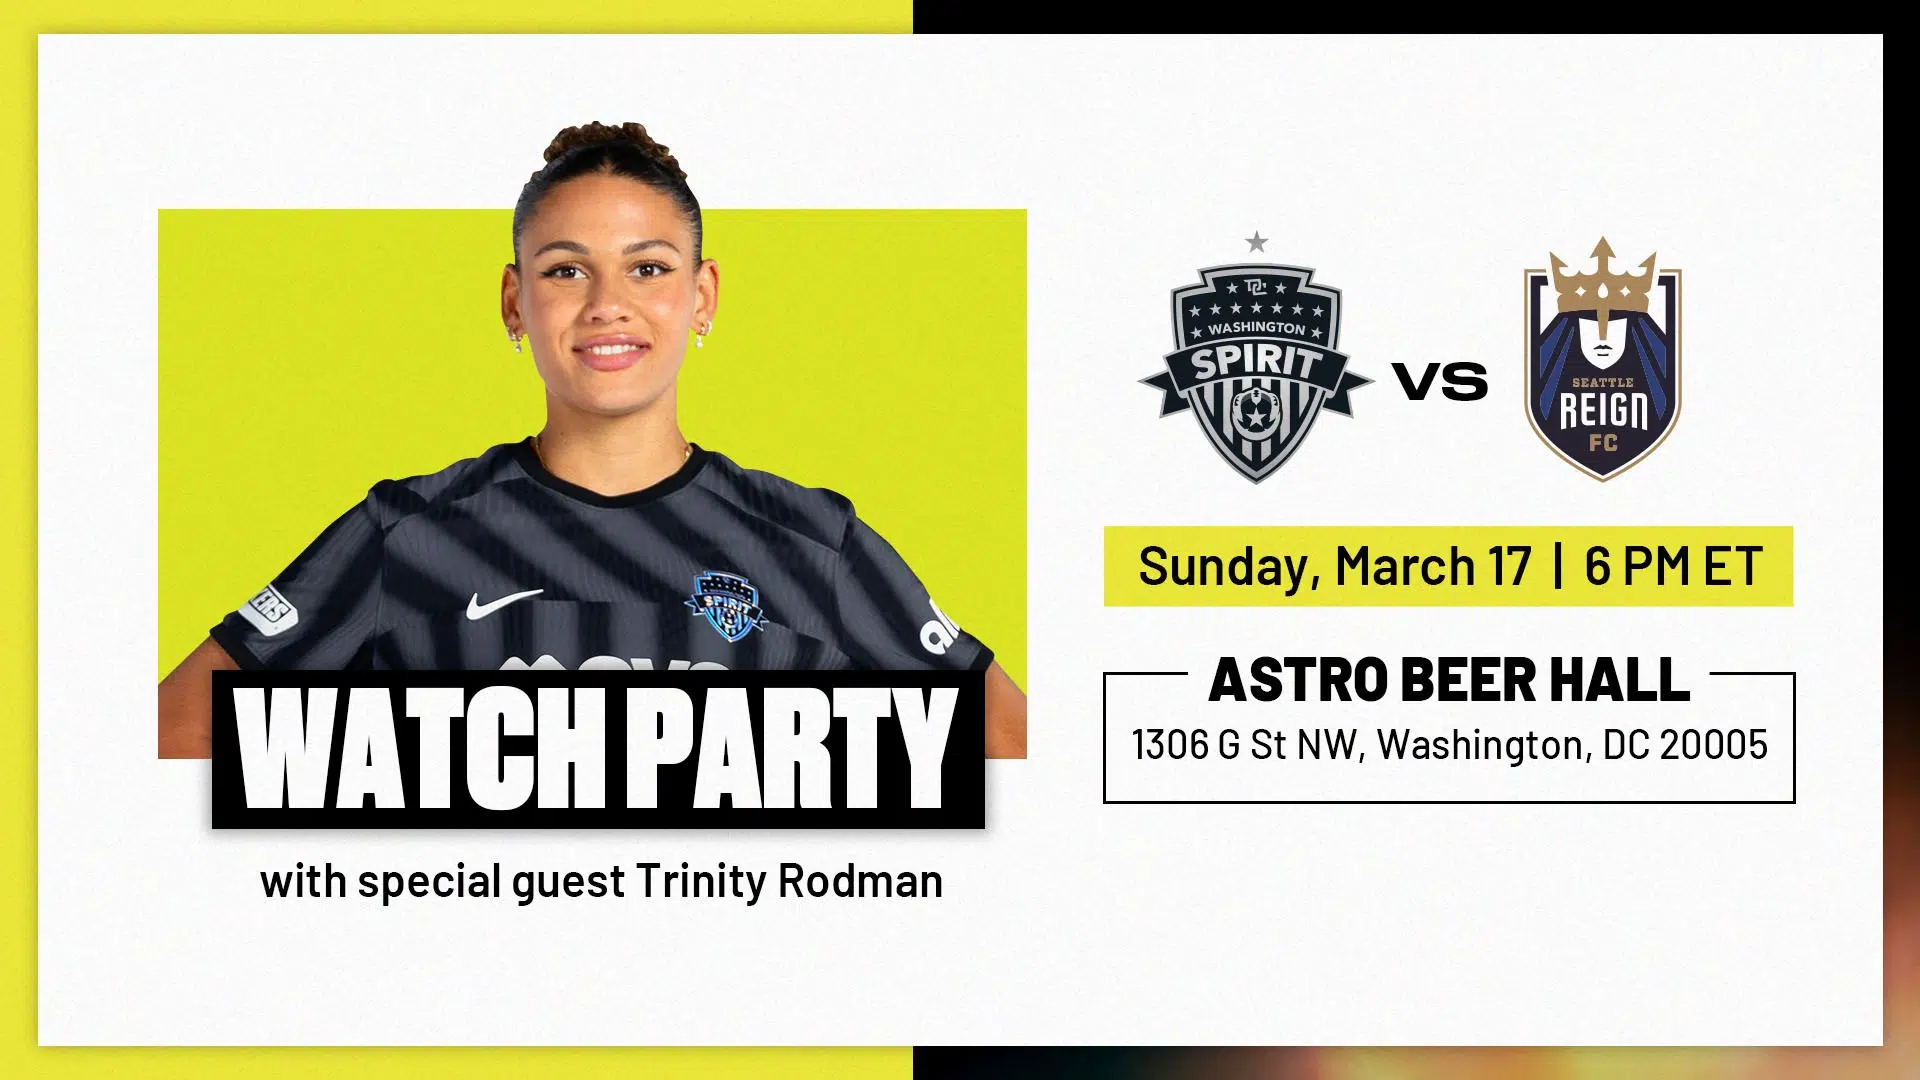 Spirit Watch Party with Trinity Rodman at Astro Beer Hall Featured Image